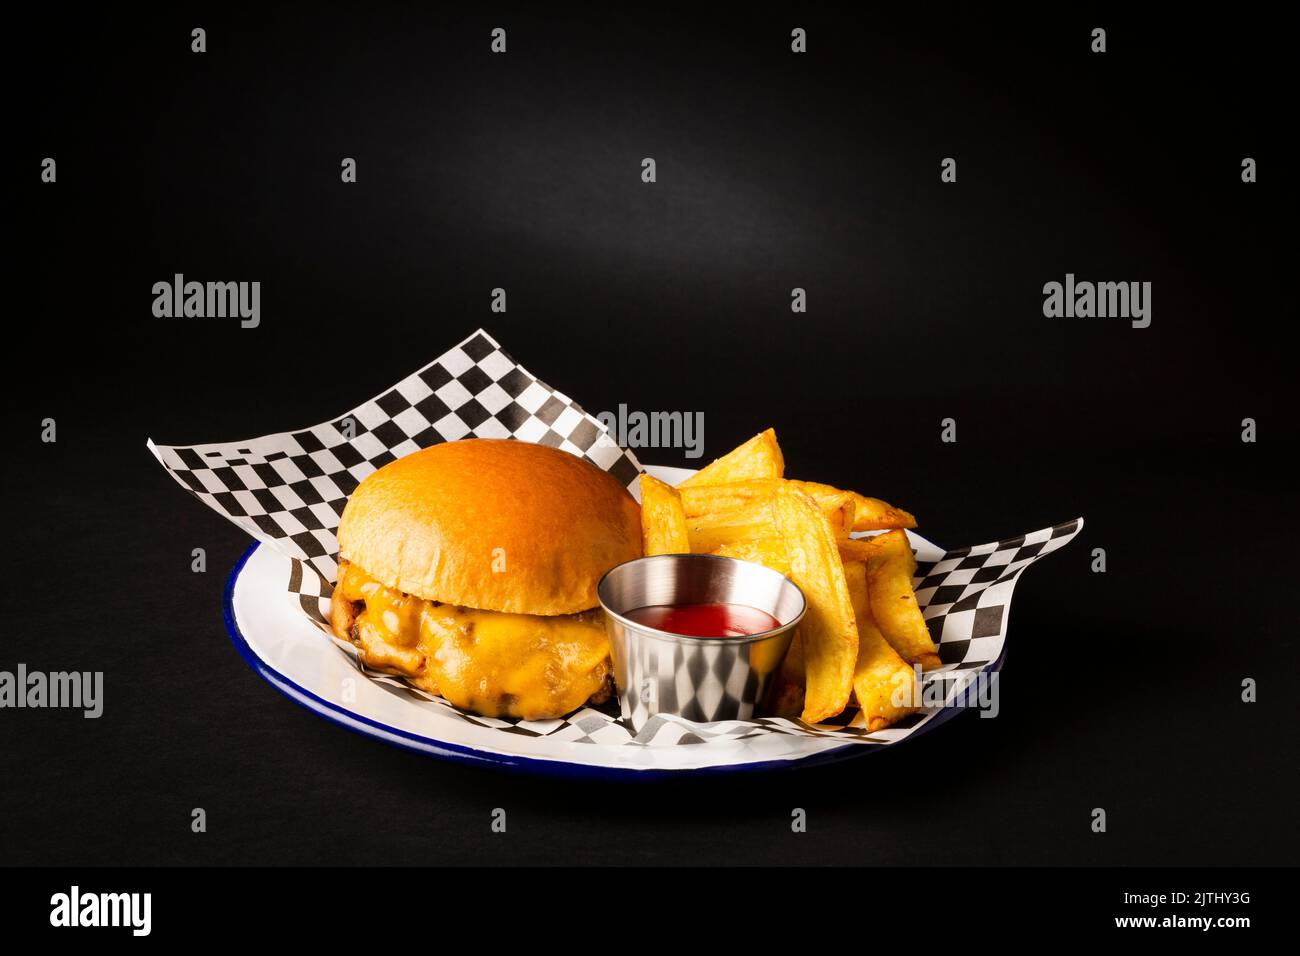 Two smashed hamburgers with cheese accompanied with french fries on a white plate over a black background Stock Photo